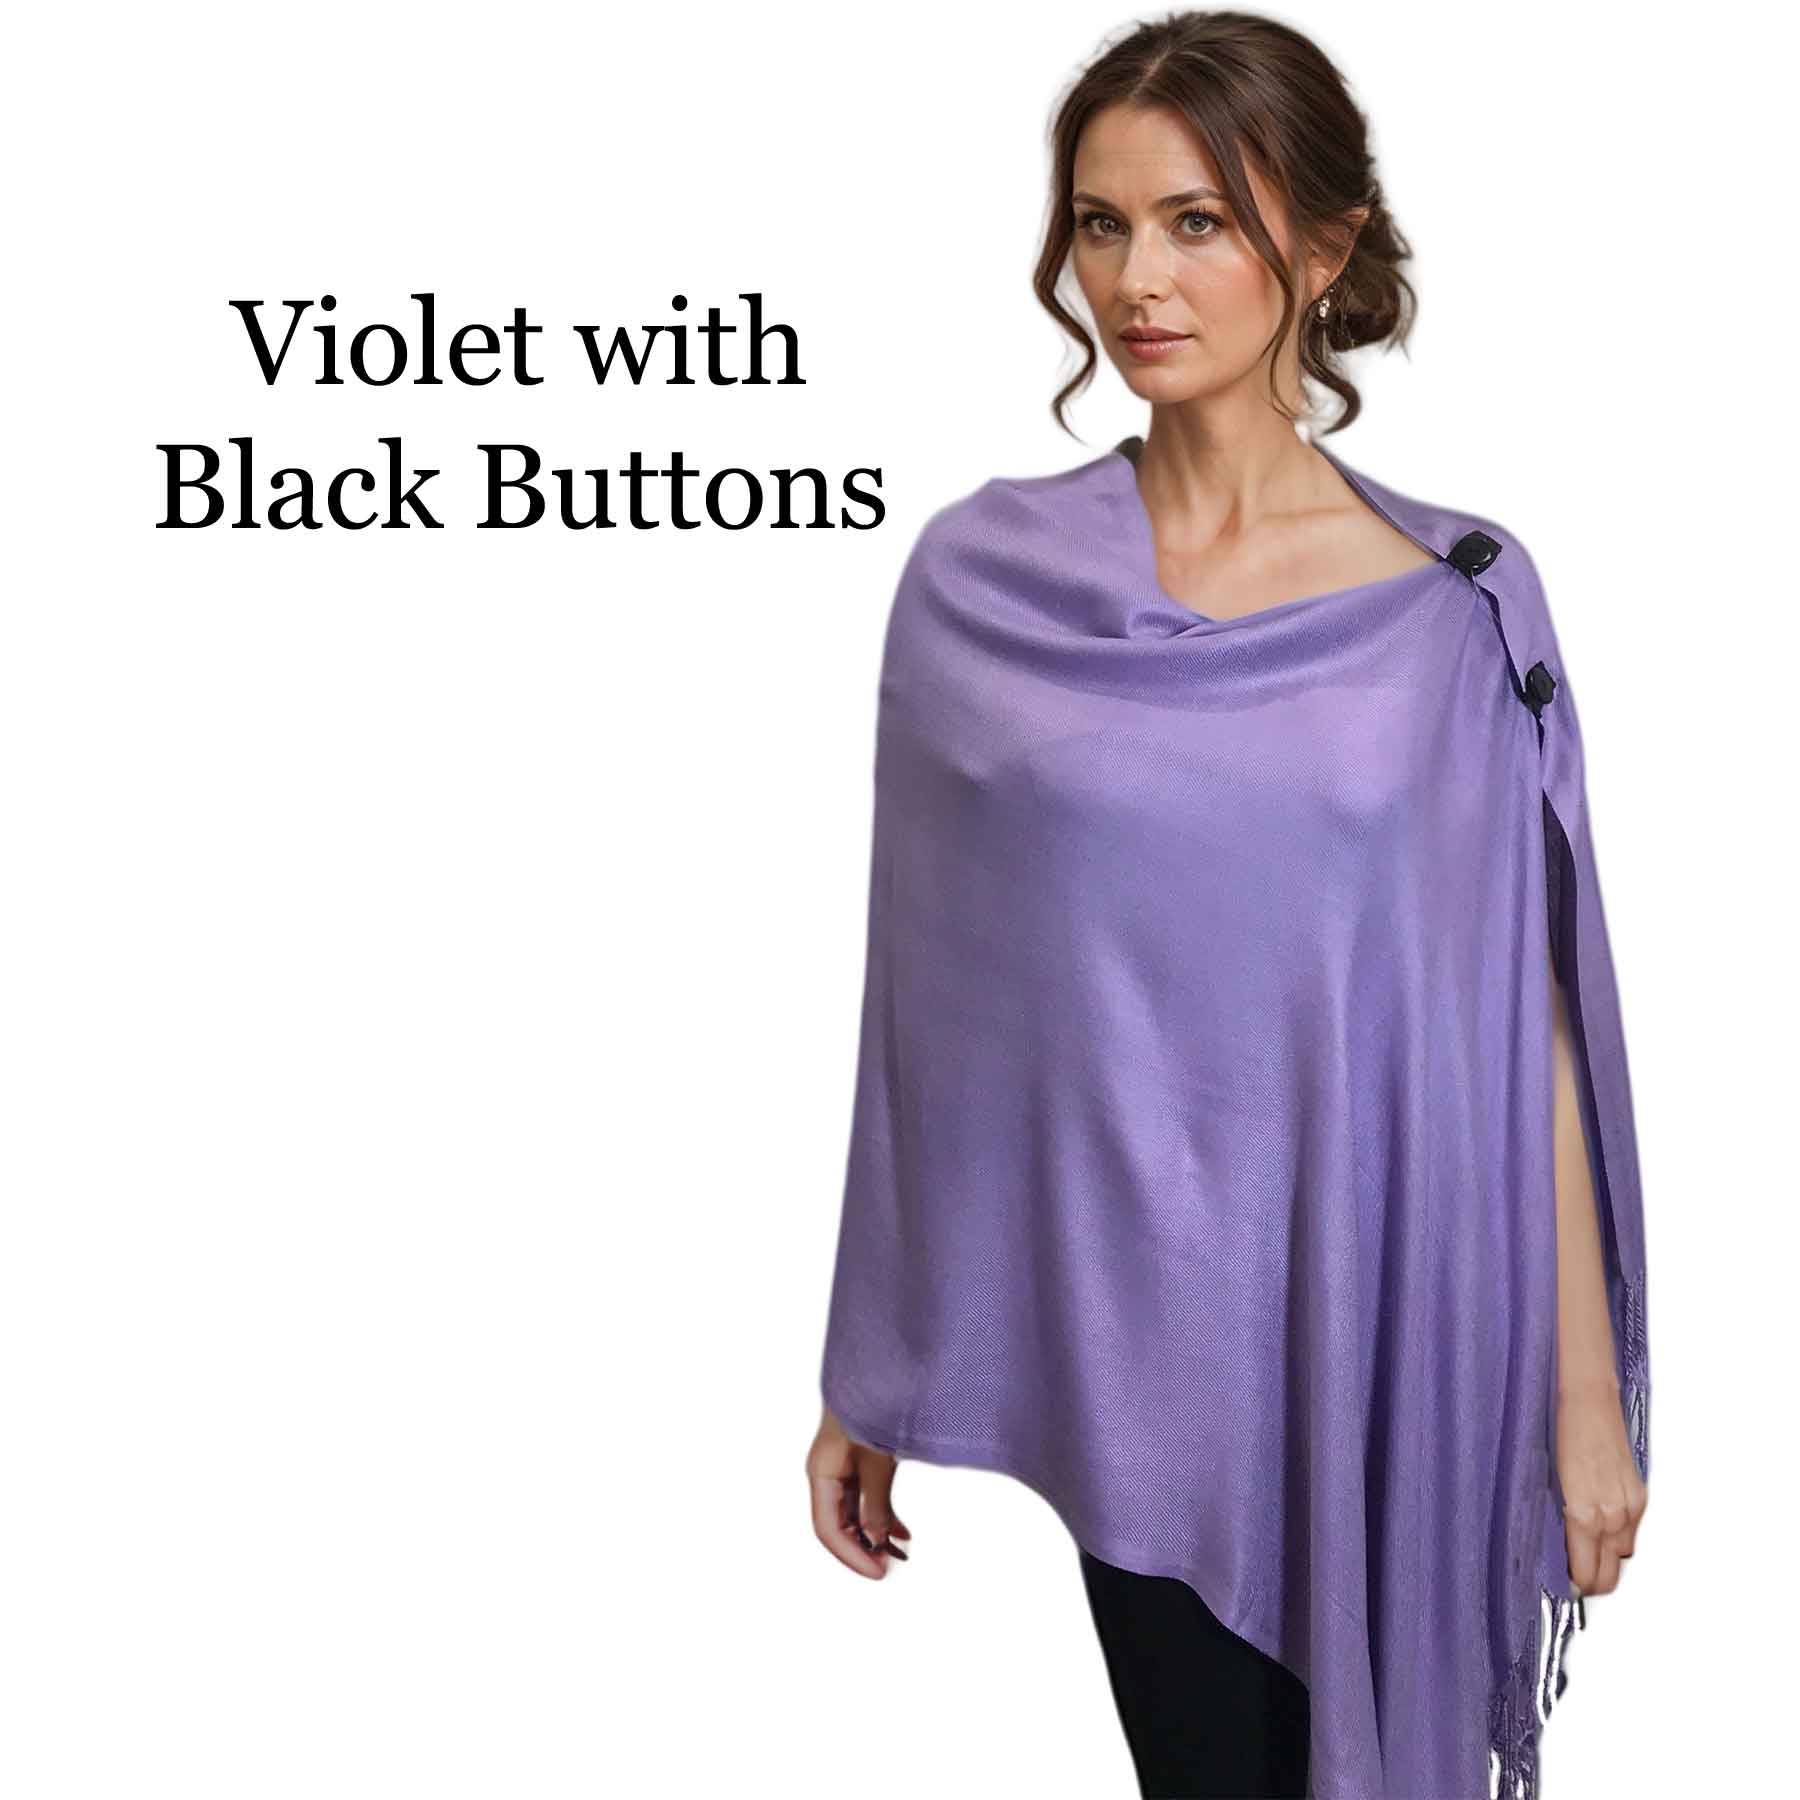 Solid Violet<br>
Pashmina Style Button Shawl